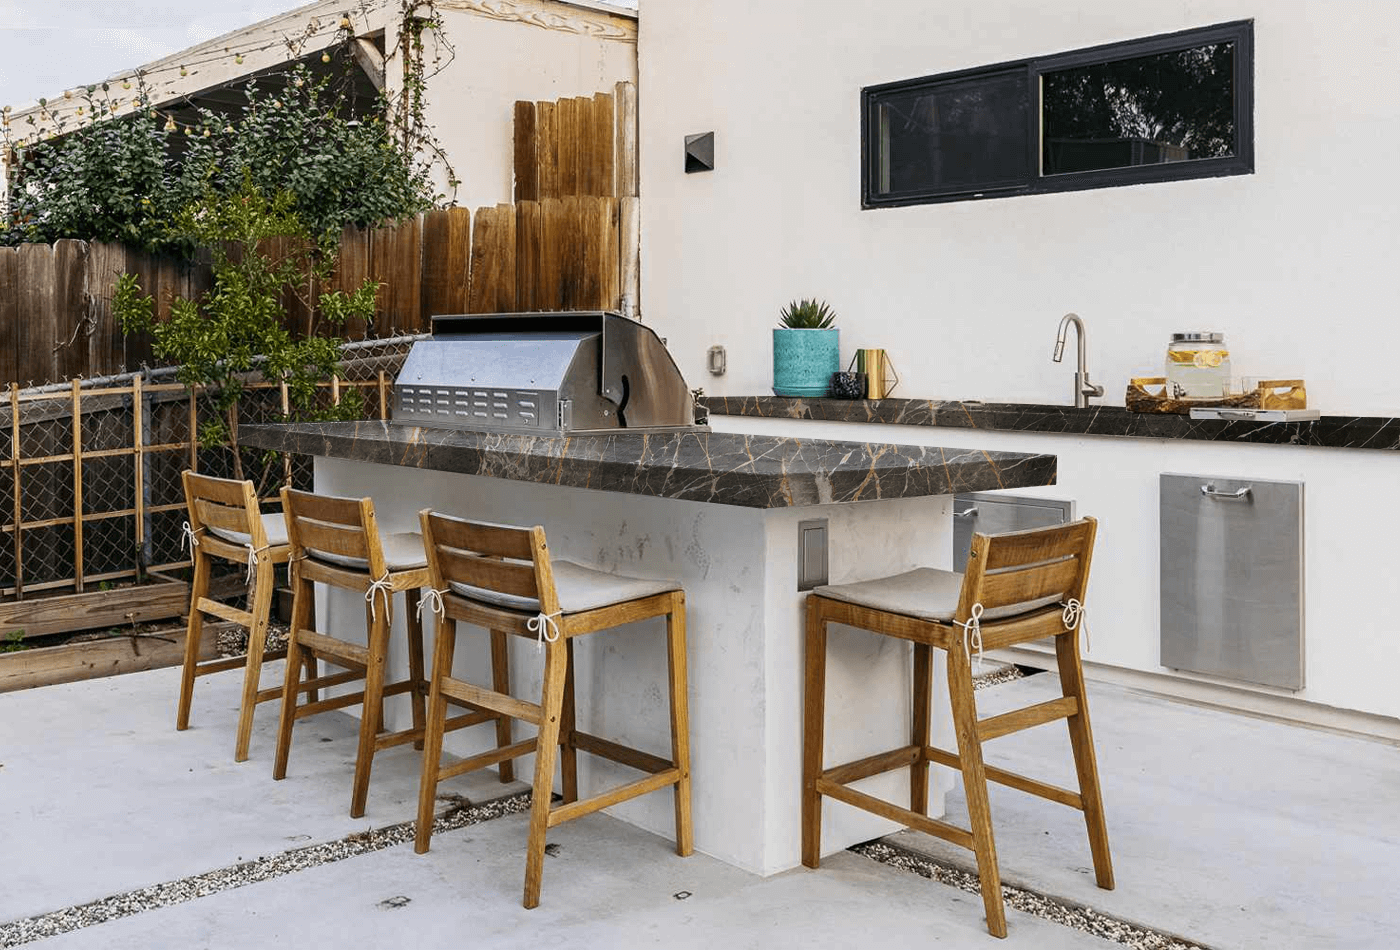 Upgrade your Backyard Minimal Cooking Space with Marble Countertop